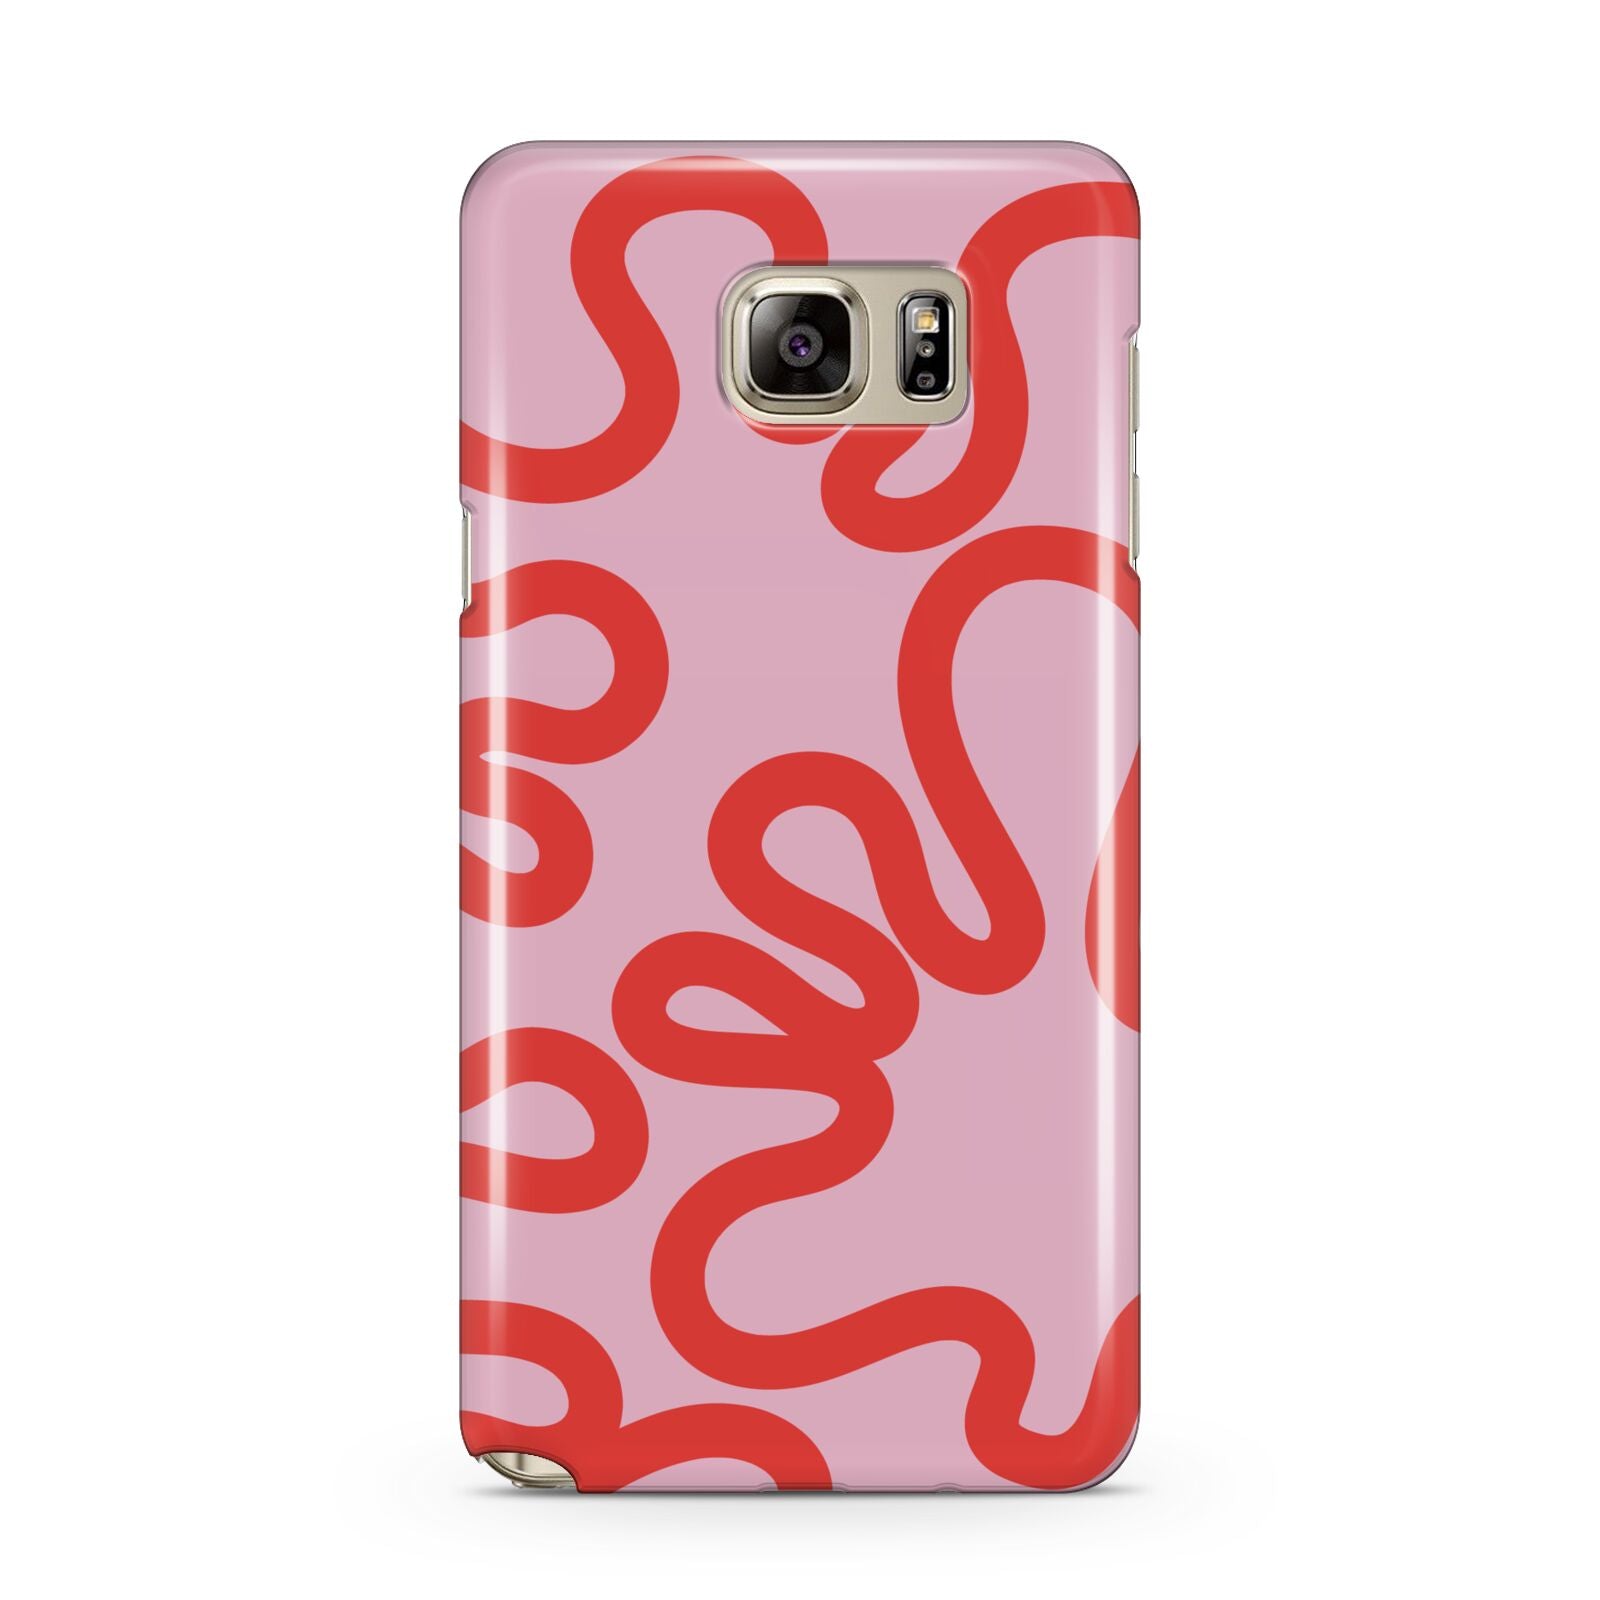 Squiggle Samsung Galaxy Note 5 Case